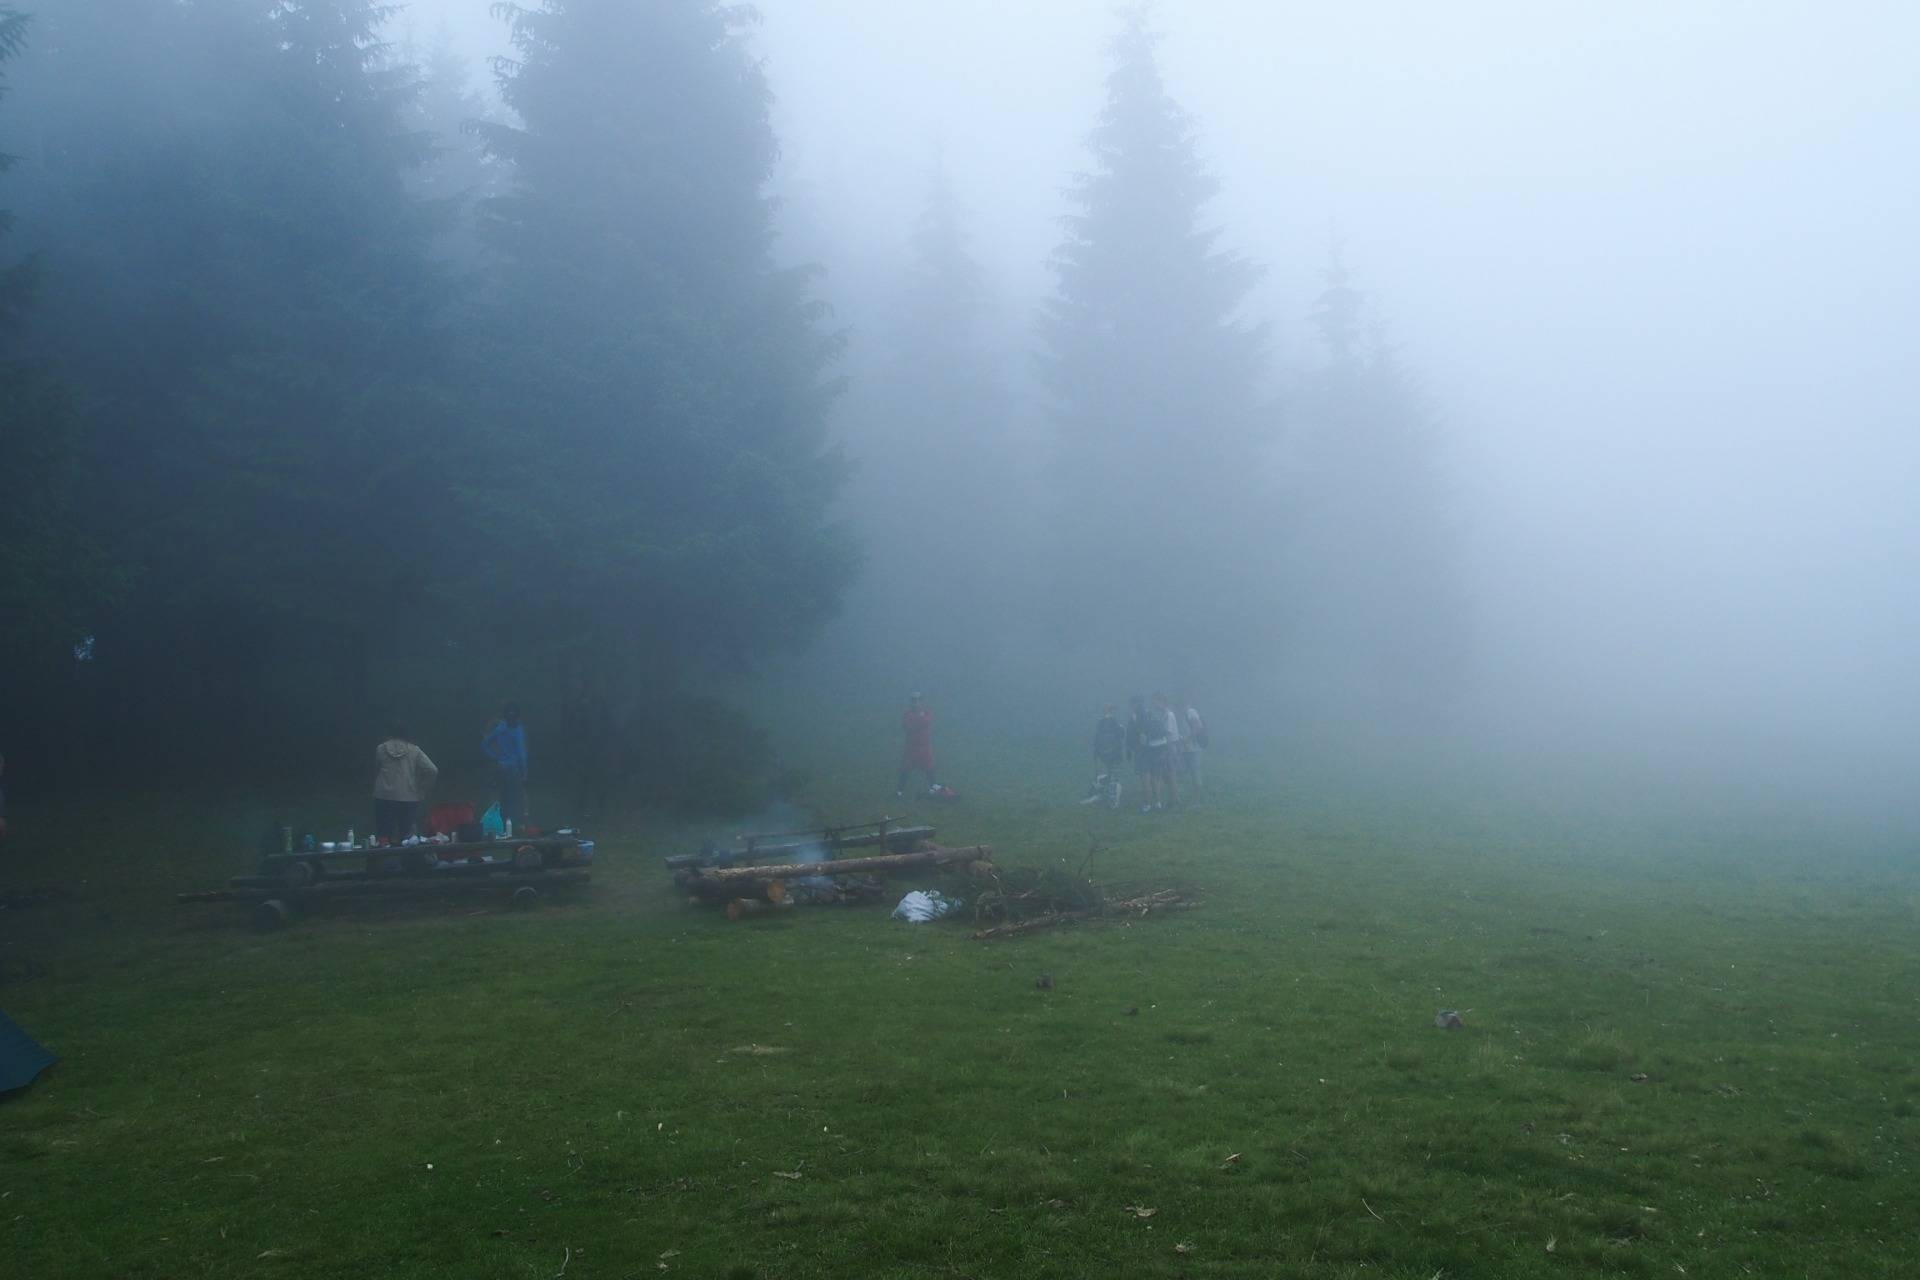 Our camp was shrouded in fog